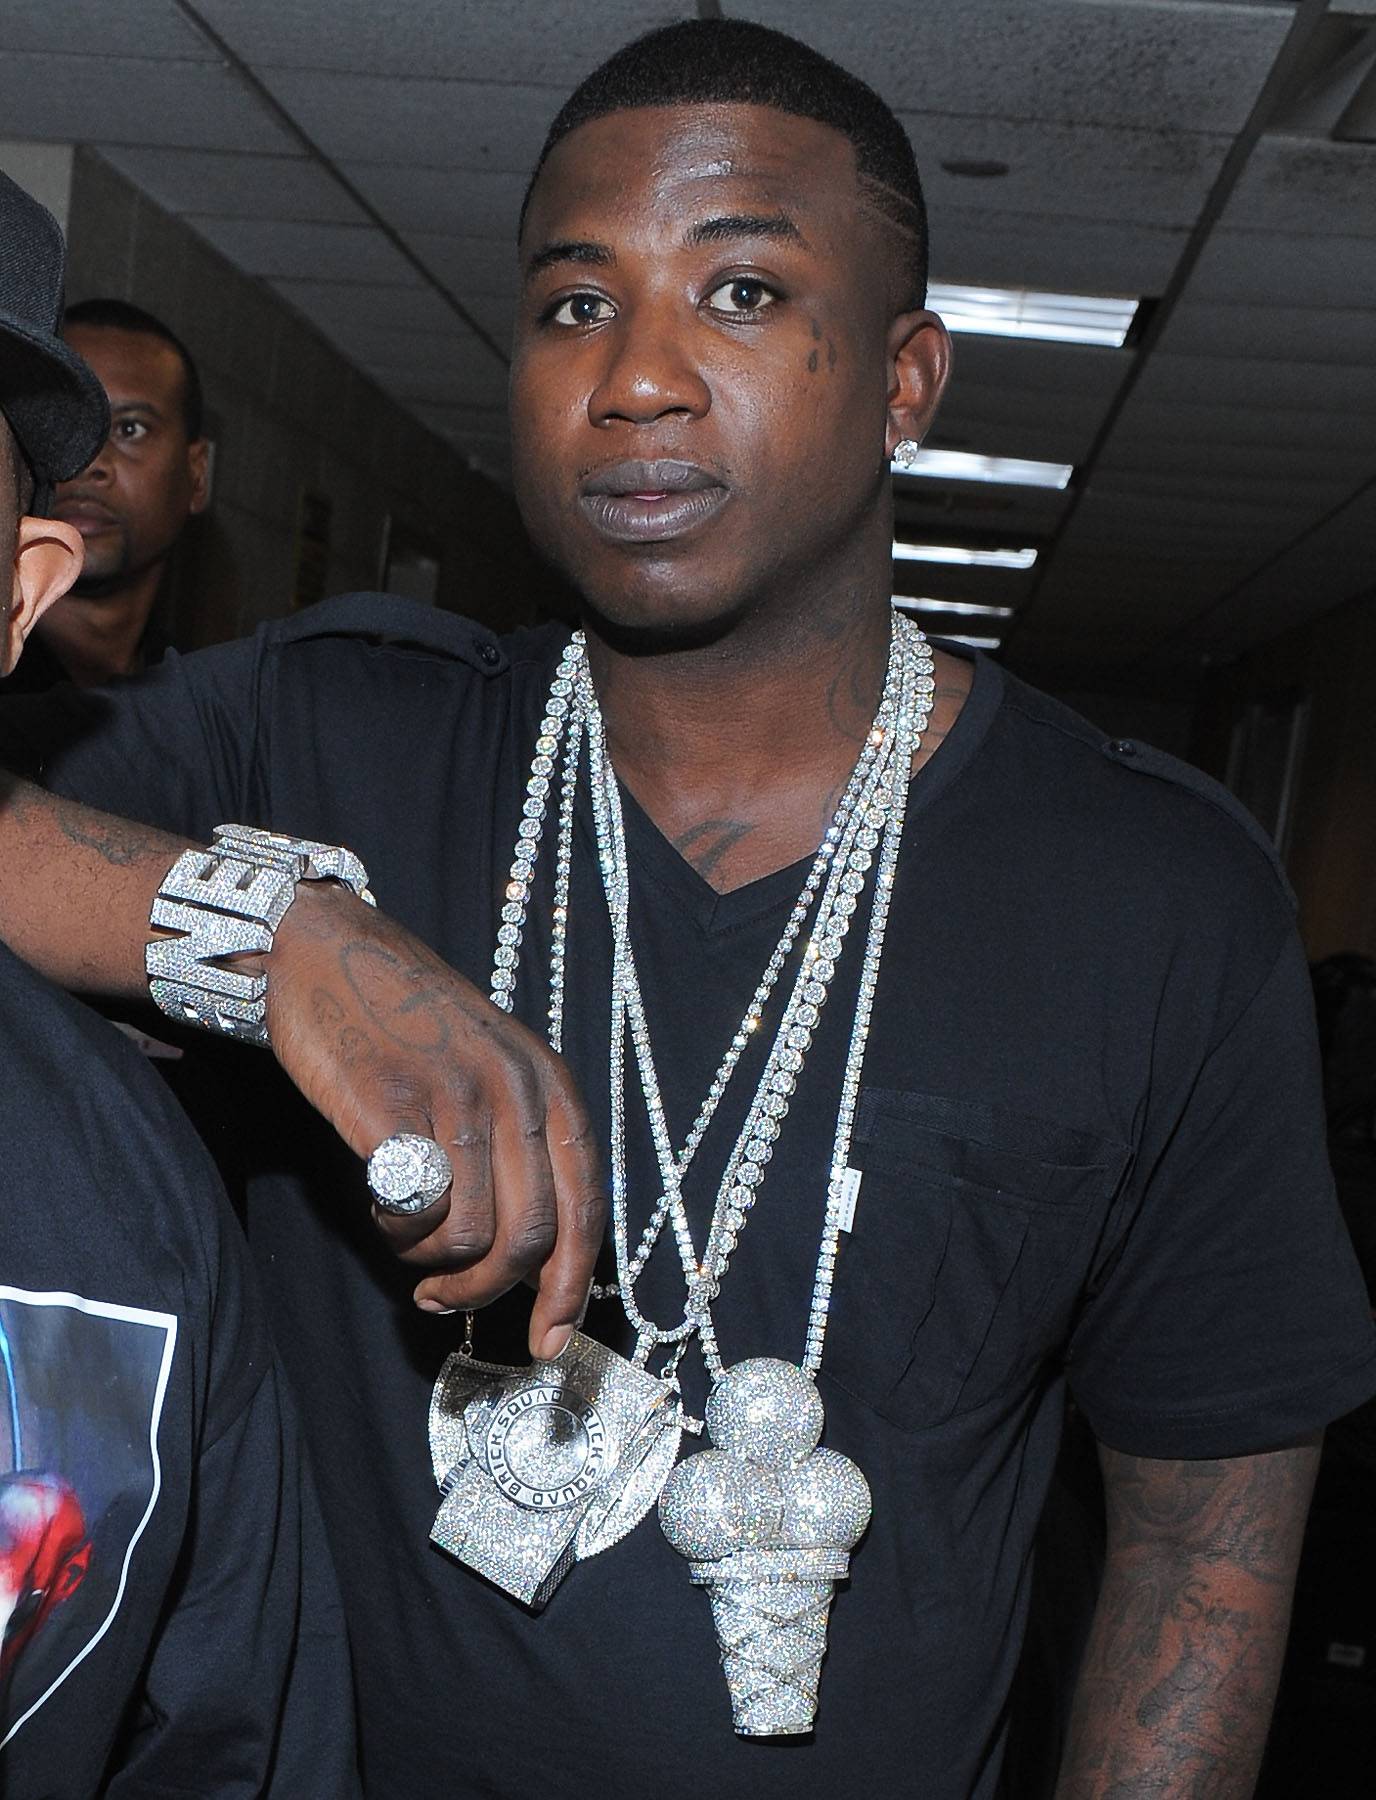 Gucci Mane to Be Released From Prison a Year Early | News | BET